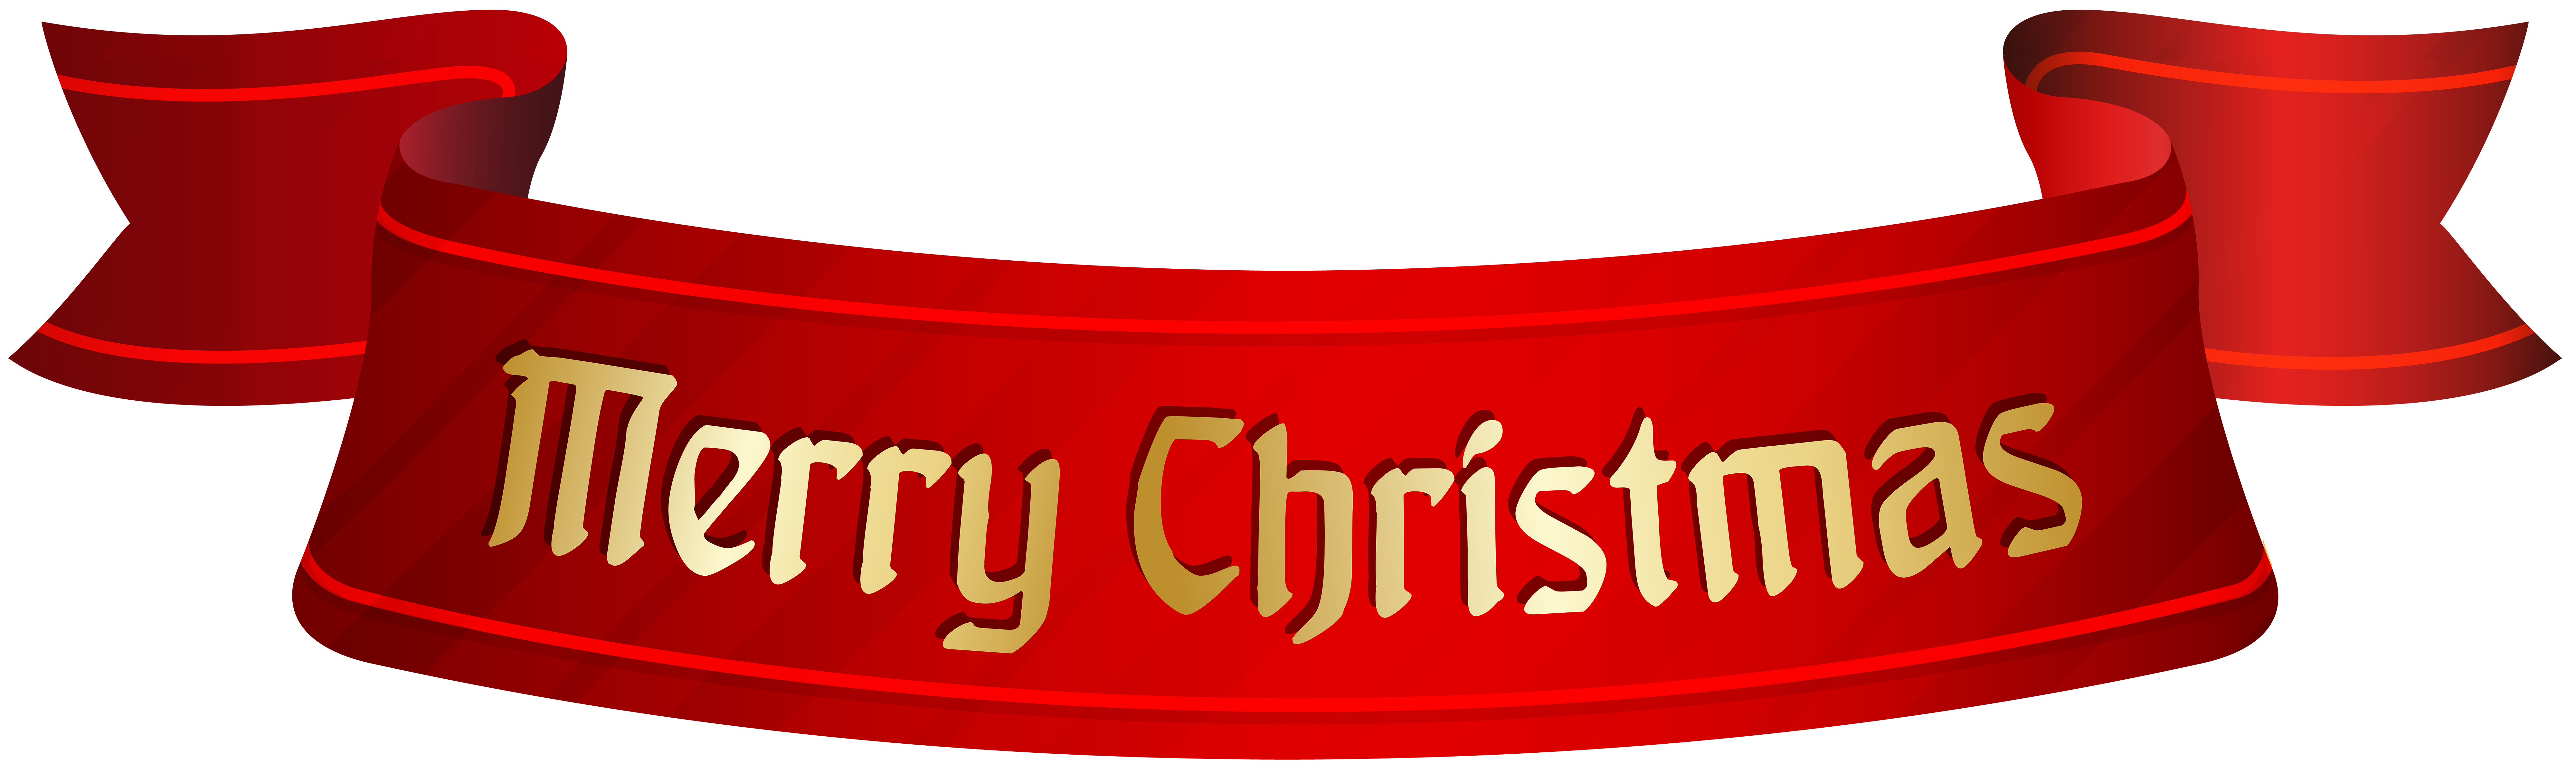 merry-christmas-banner-clipart-free-download-on-clipartmag